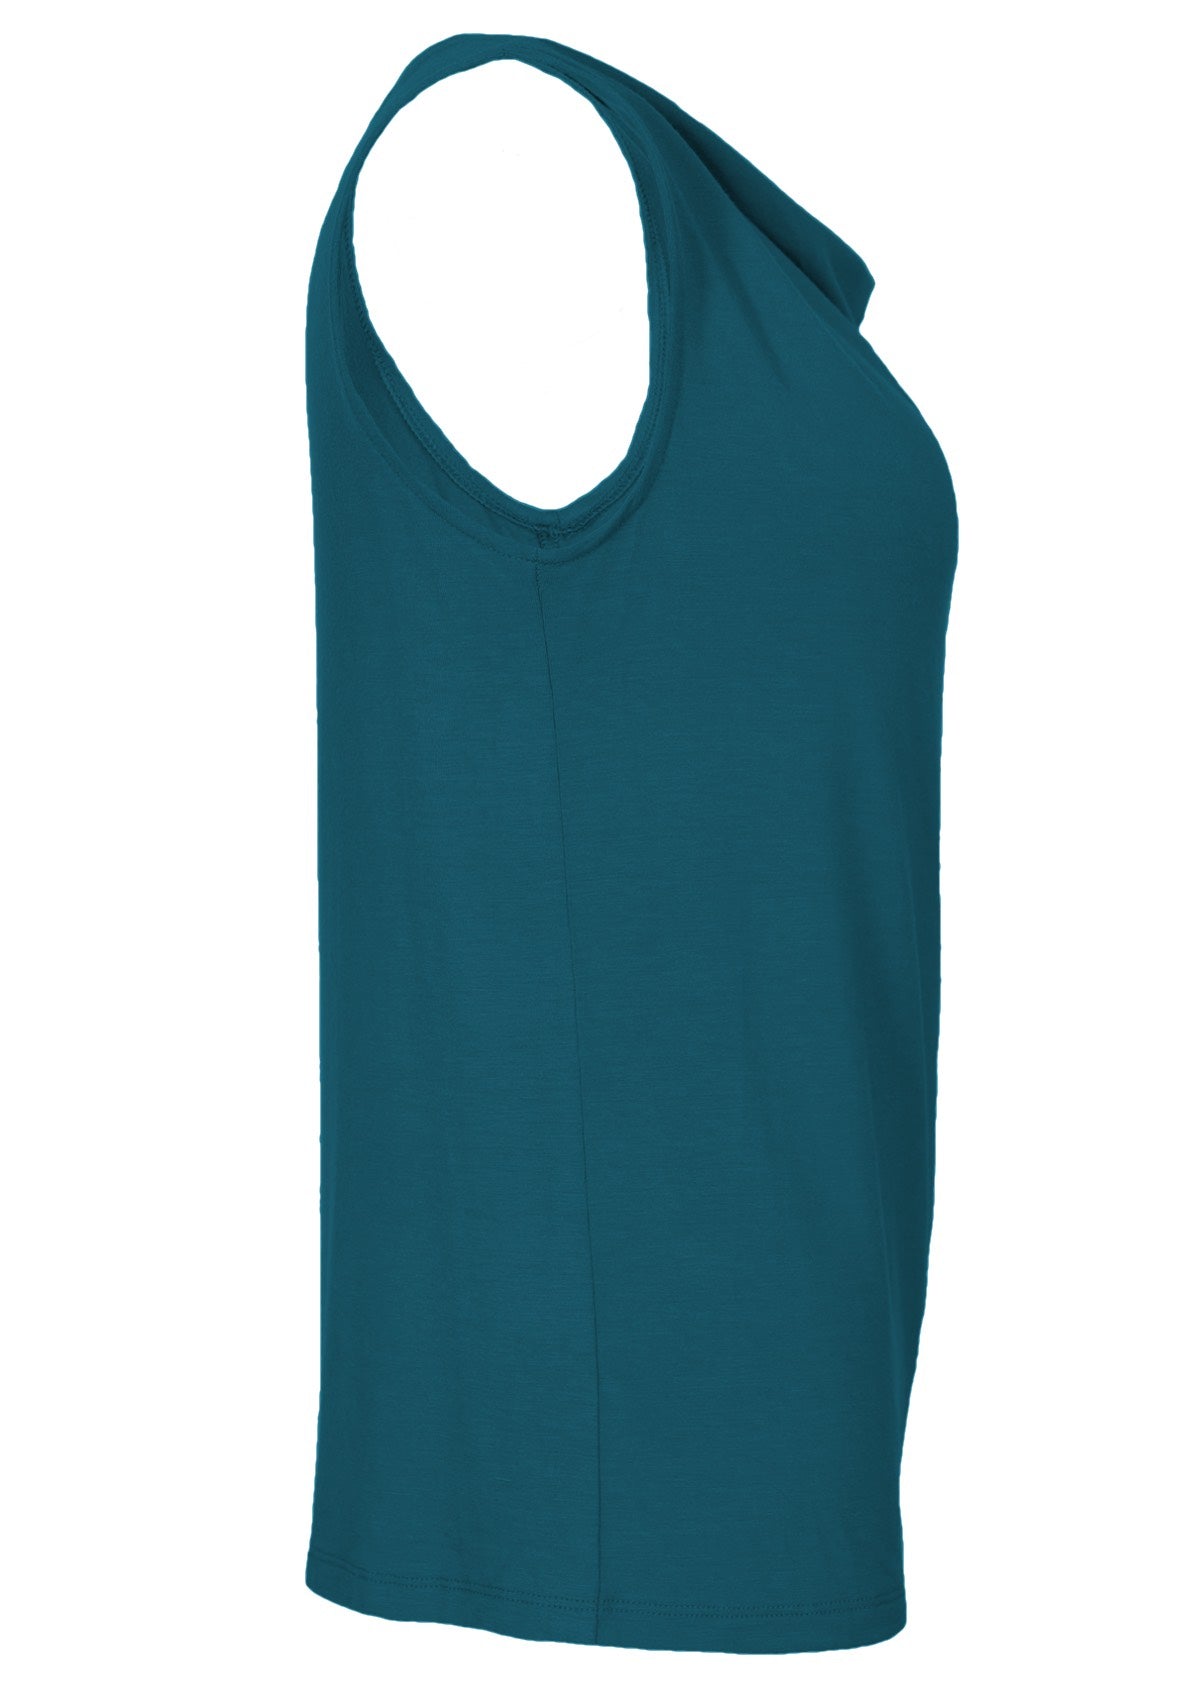 Side view soft stretch rayon teal sleeveless women's top